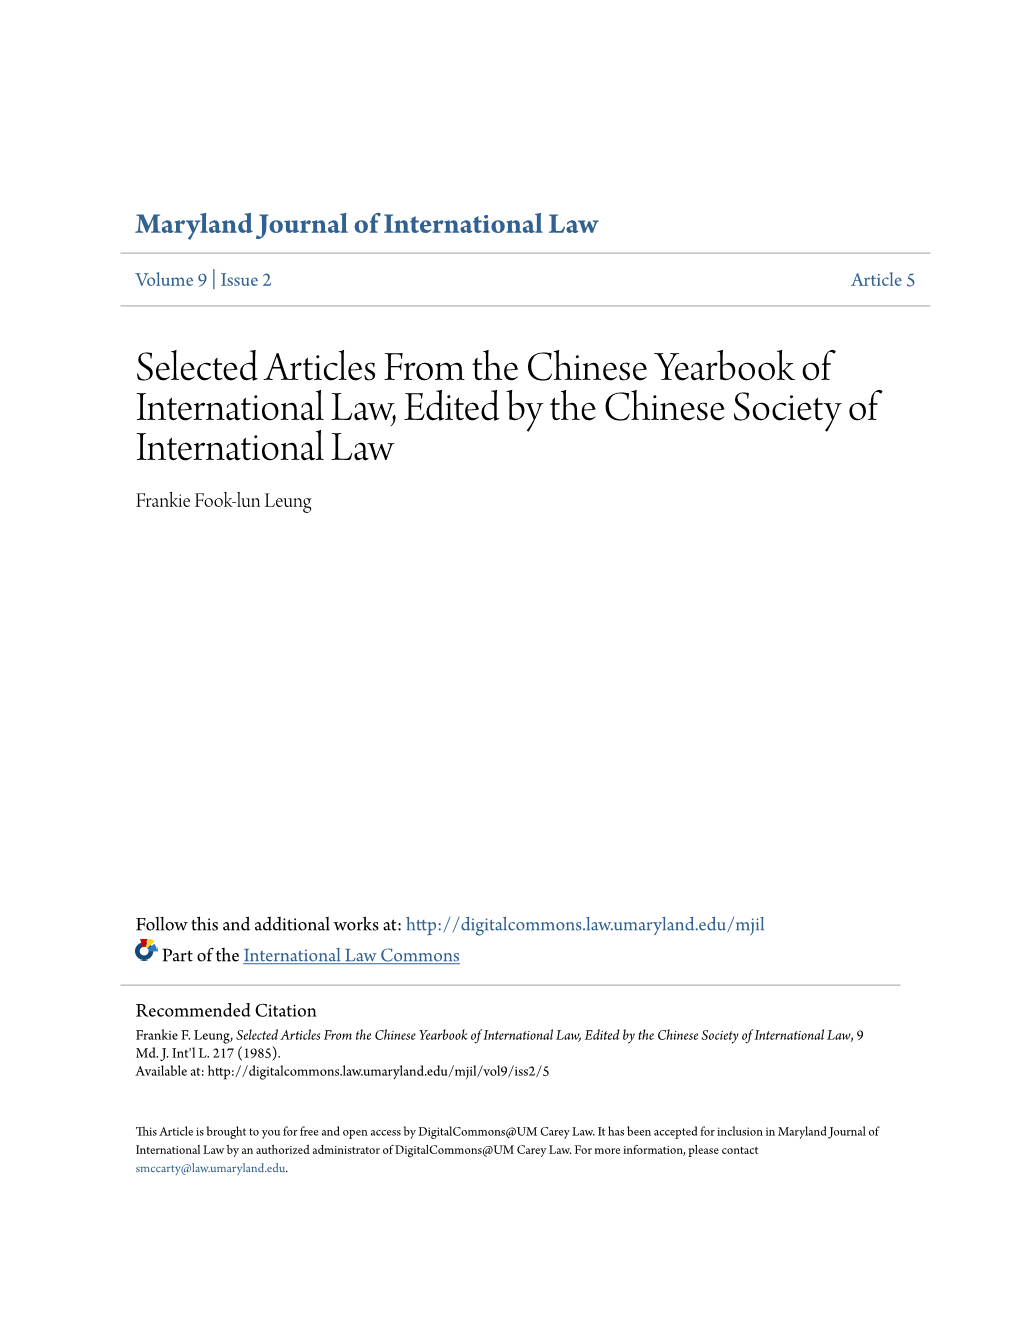 Selected Articles from the Chinese Yearbook of International Law, Edited by the Chinese Society of International Law Frankie Fook-Lun Leung